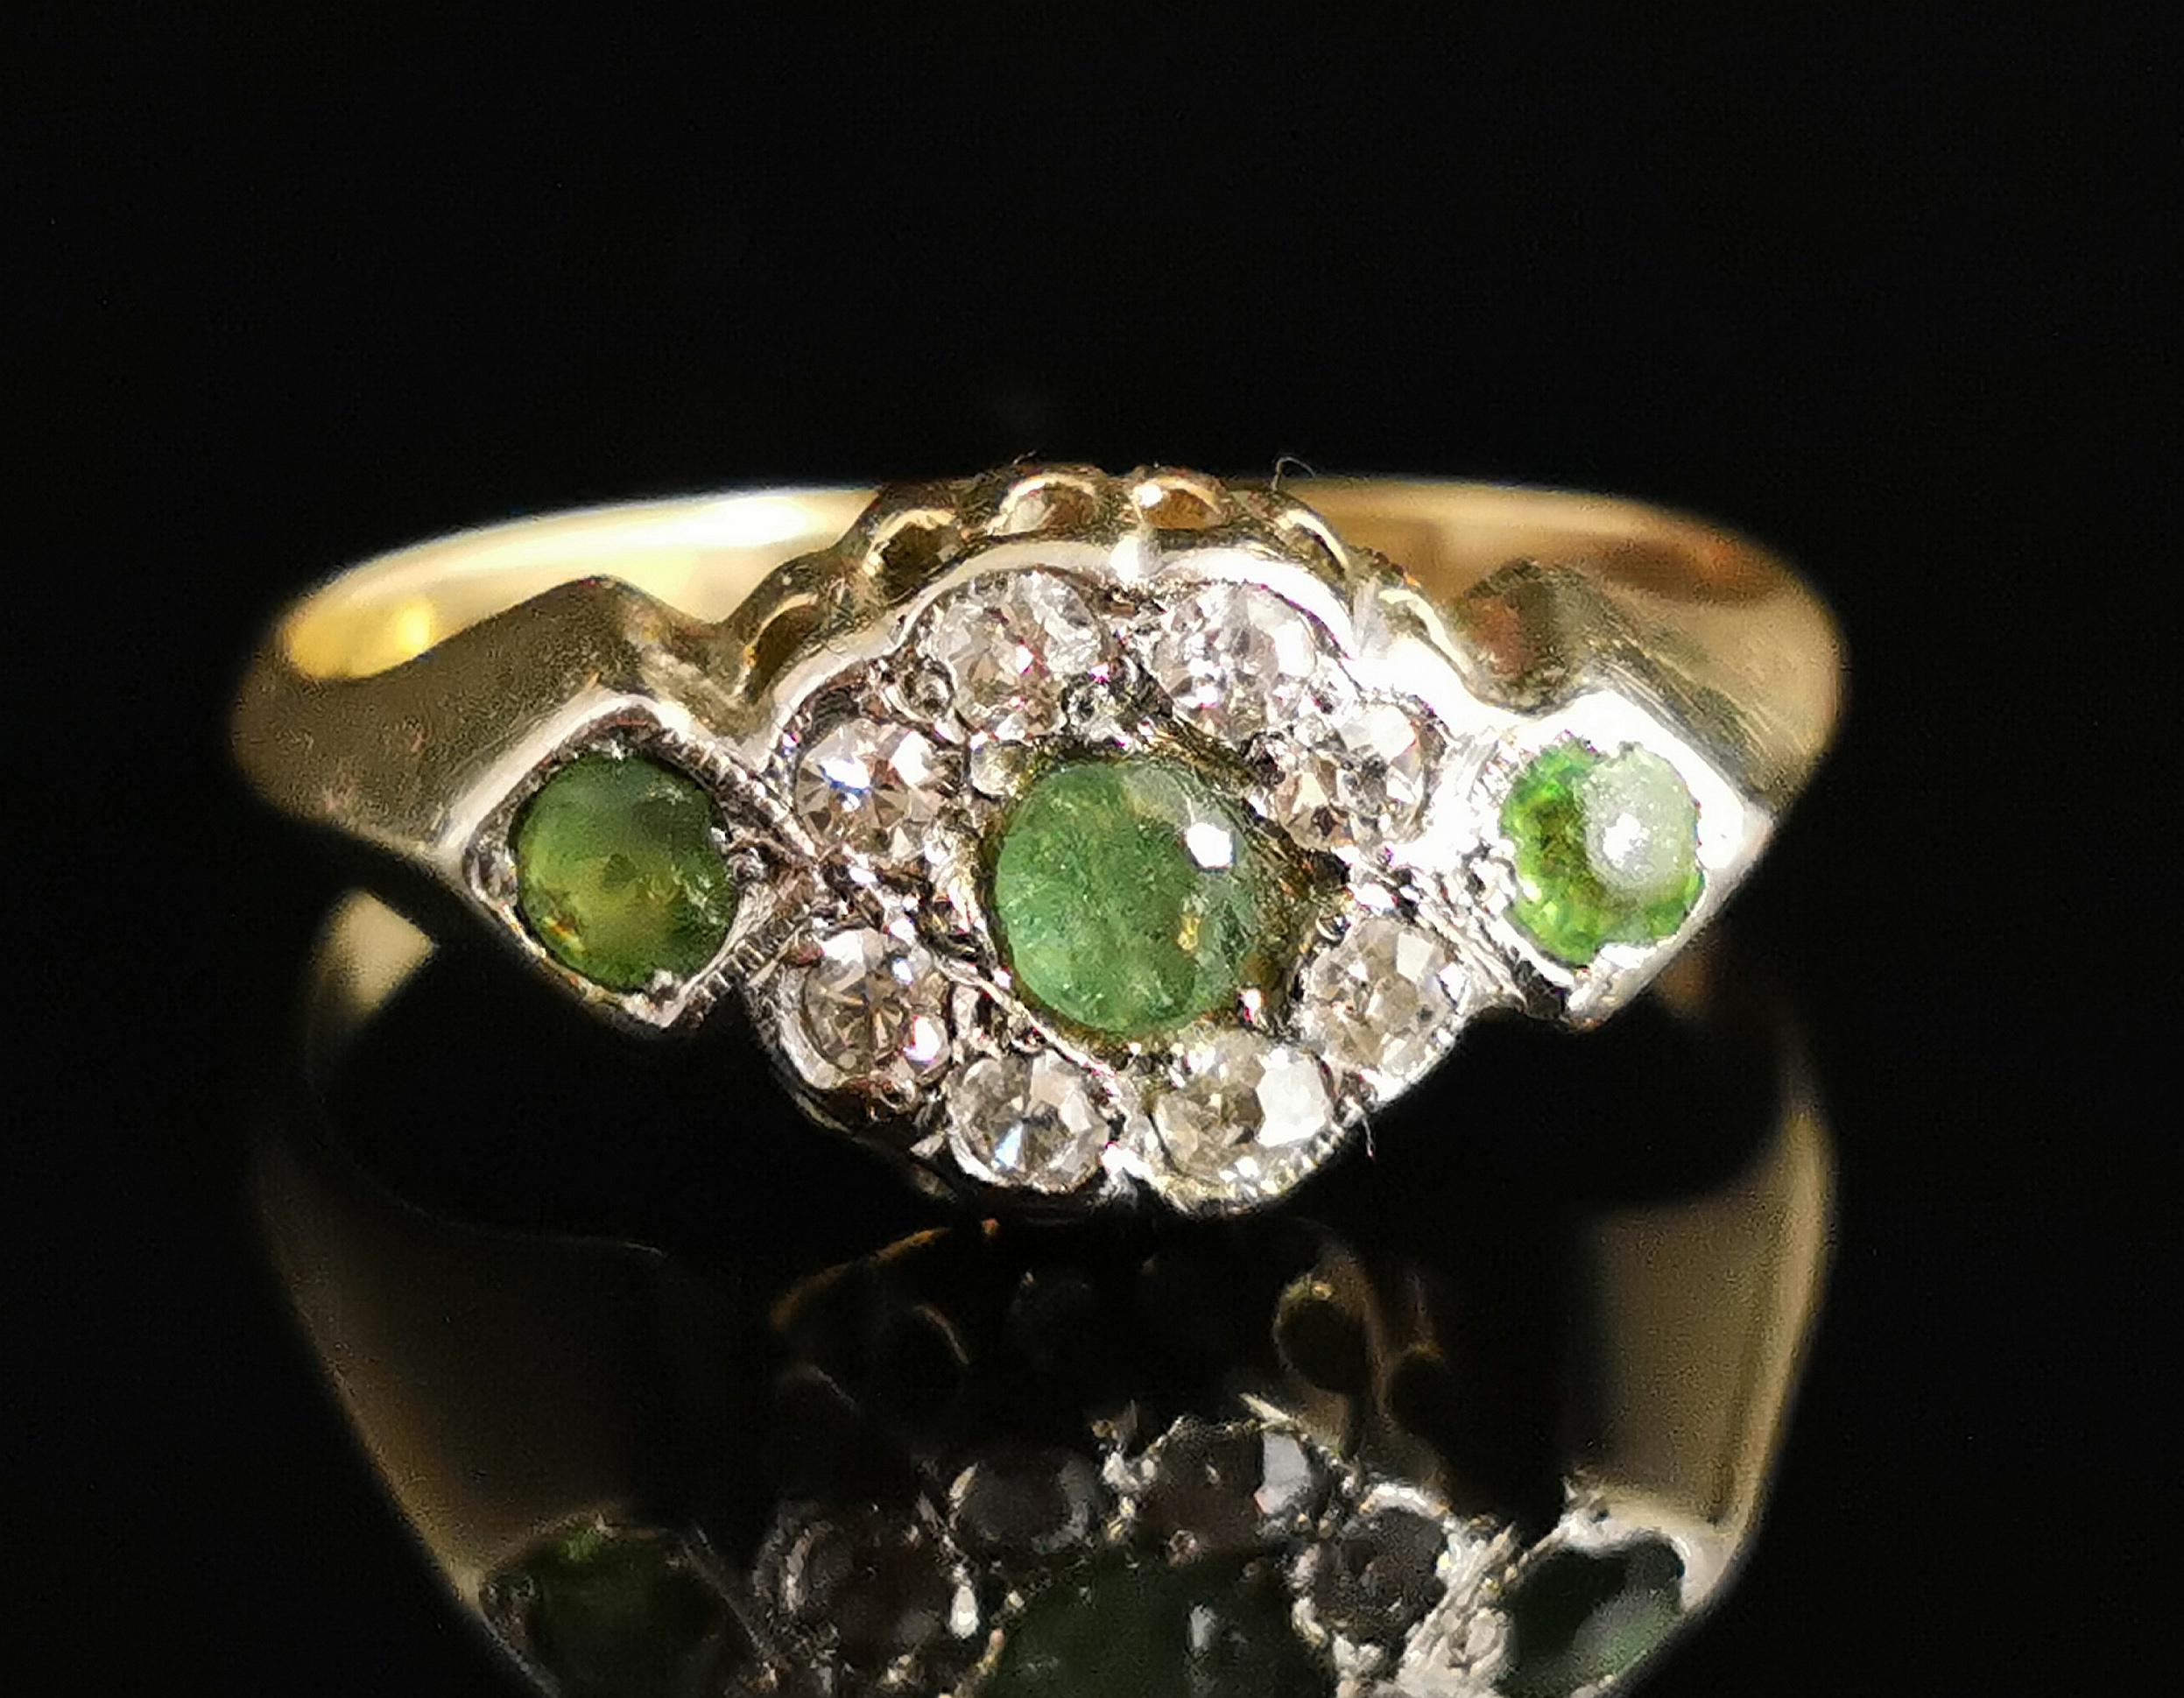 A stunning antique, Edwardian era Peridot and Diamond cluster ring in 18 karat yellow gold.

It has a nice chunky rich yellow gold band with slightly raised diamond shaped shoulders.

The centre features a single round cut peridot surrounded by a